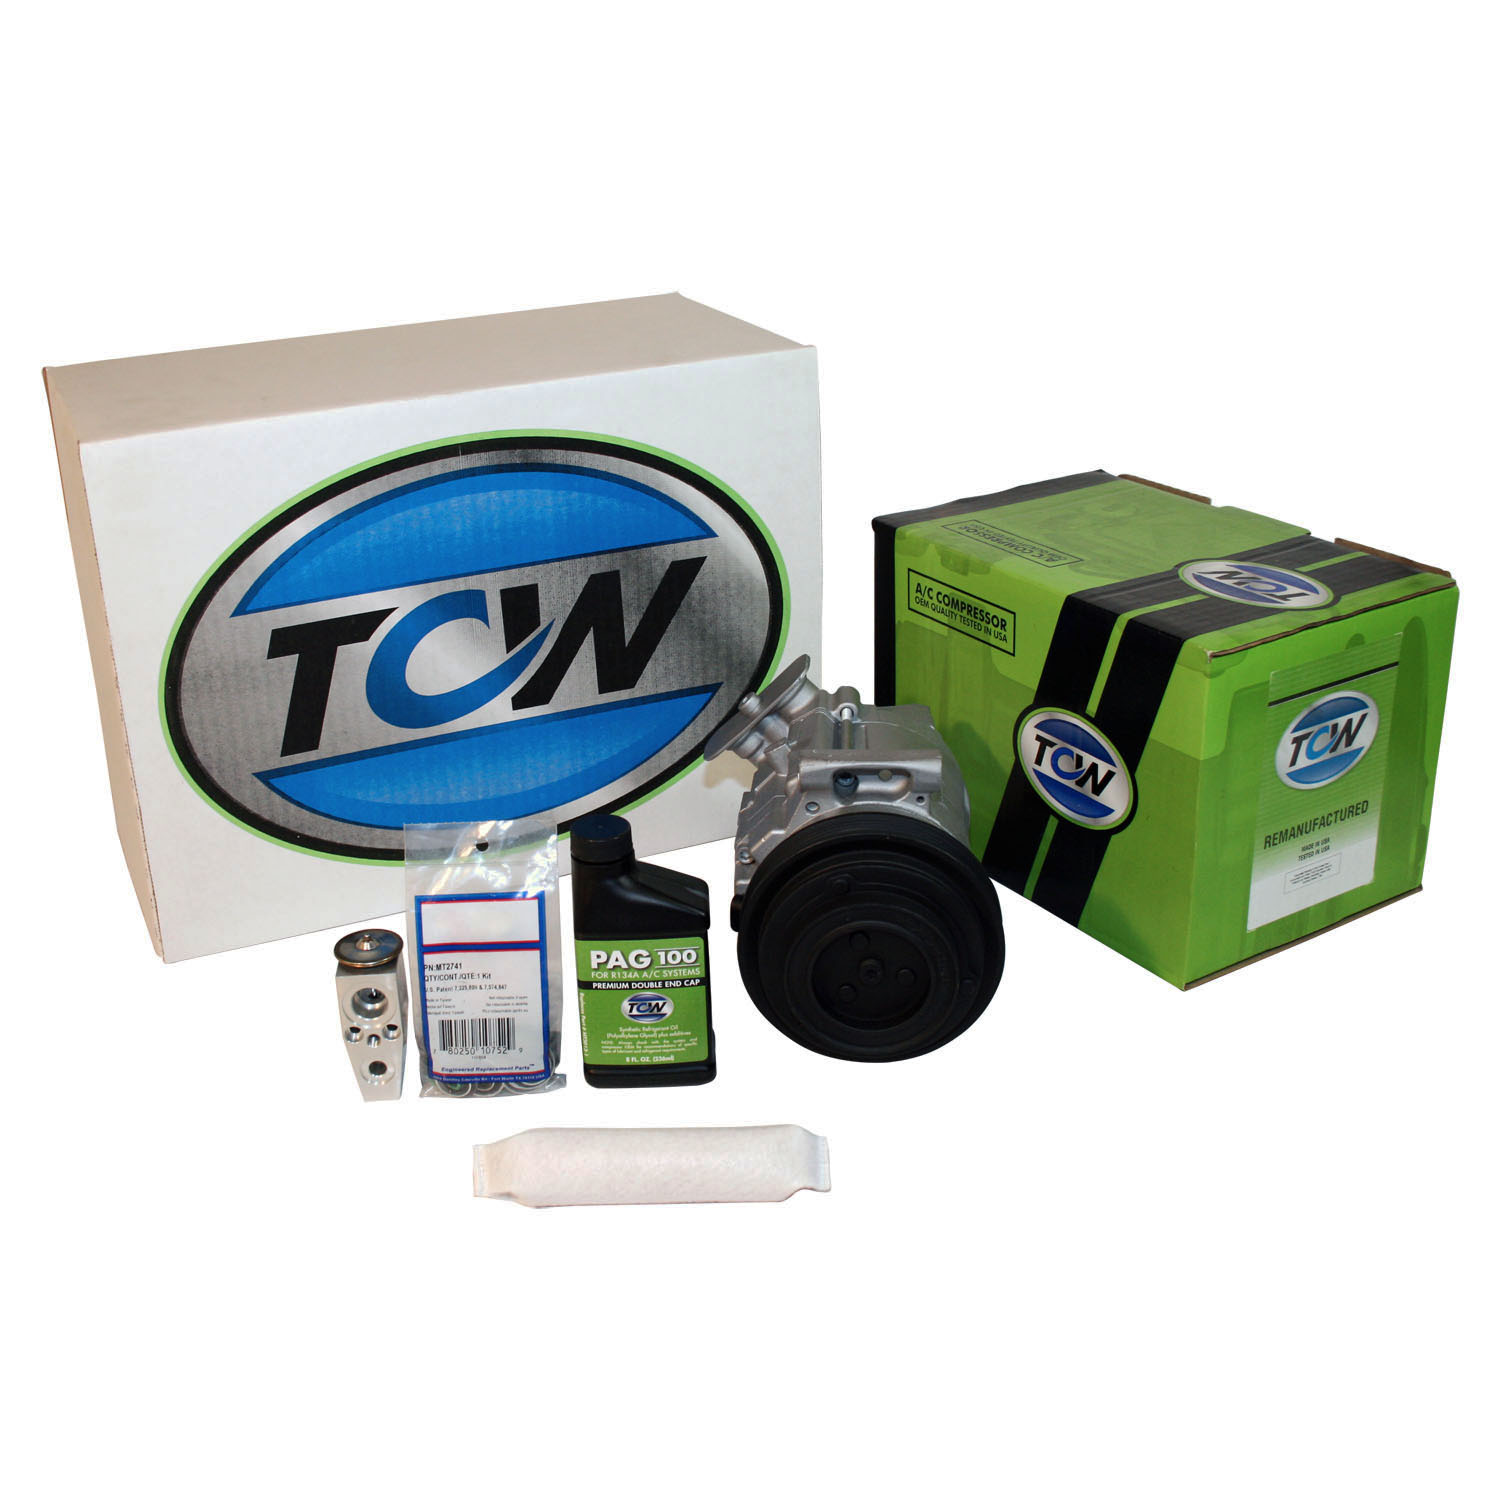 TCW Vehicle A/C Kit K1000475R Remanufactured Product Image field_60b6a13a6e67c